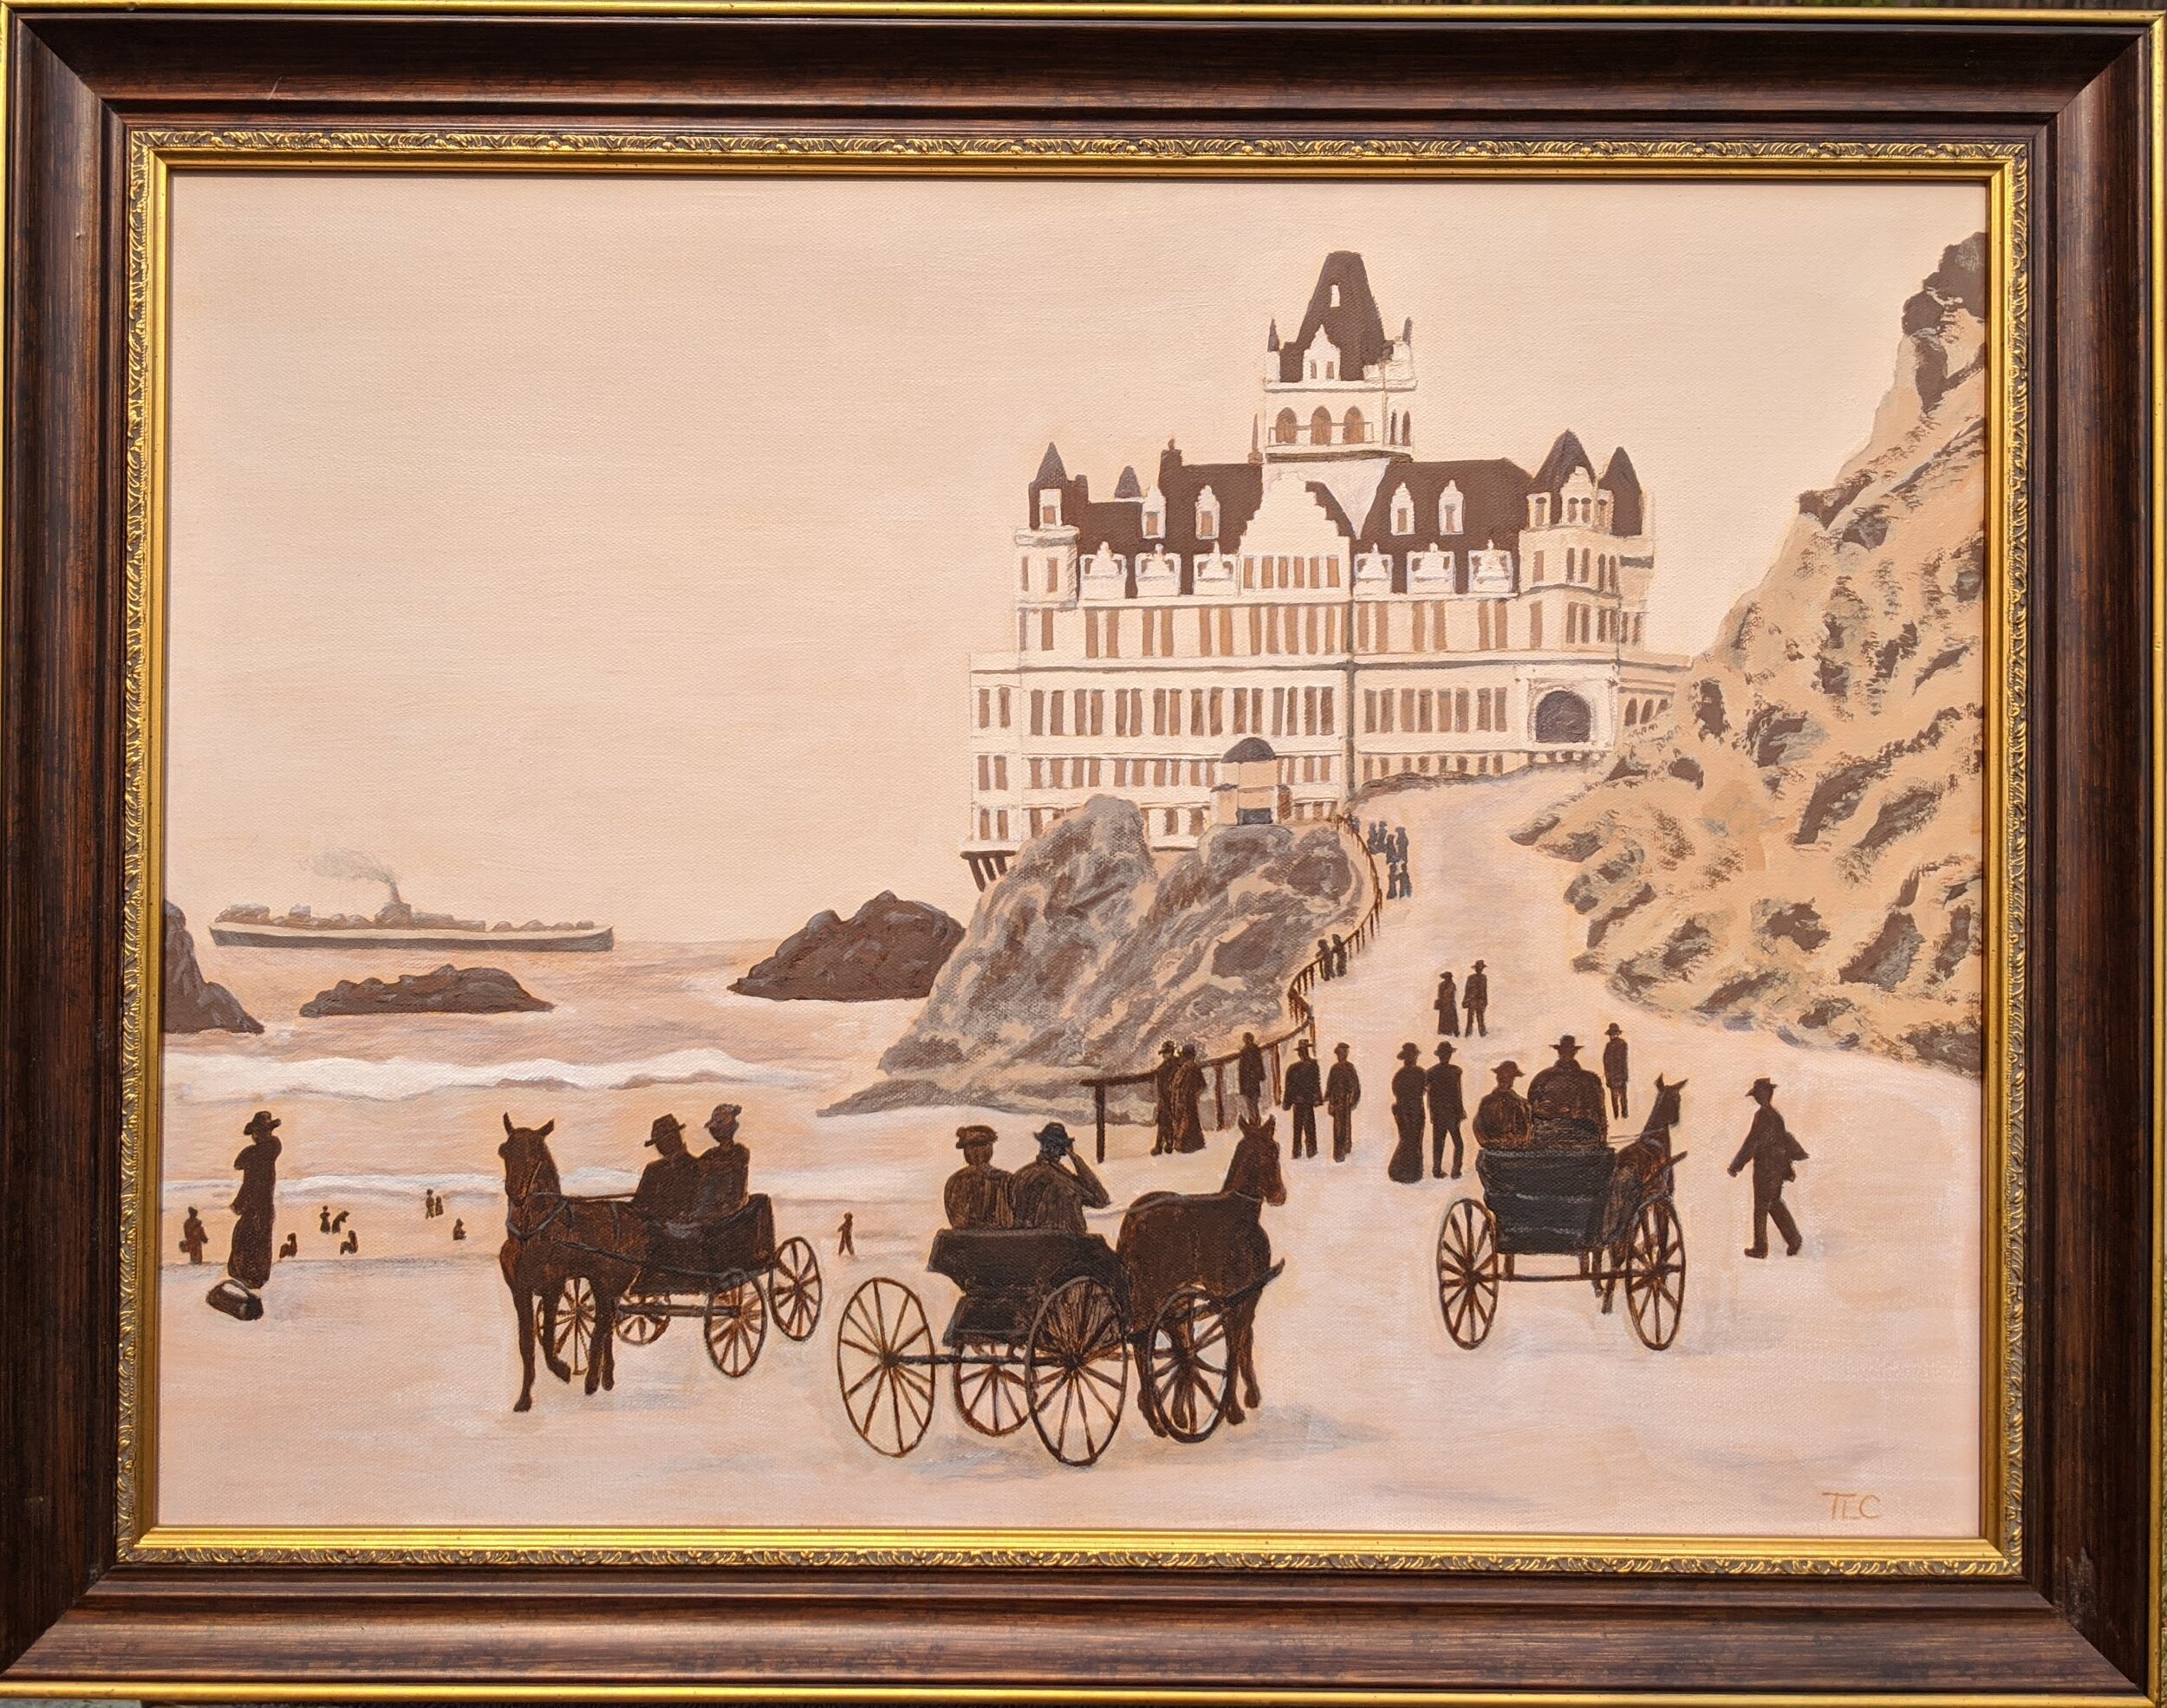 Cliff House ca. 1903